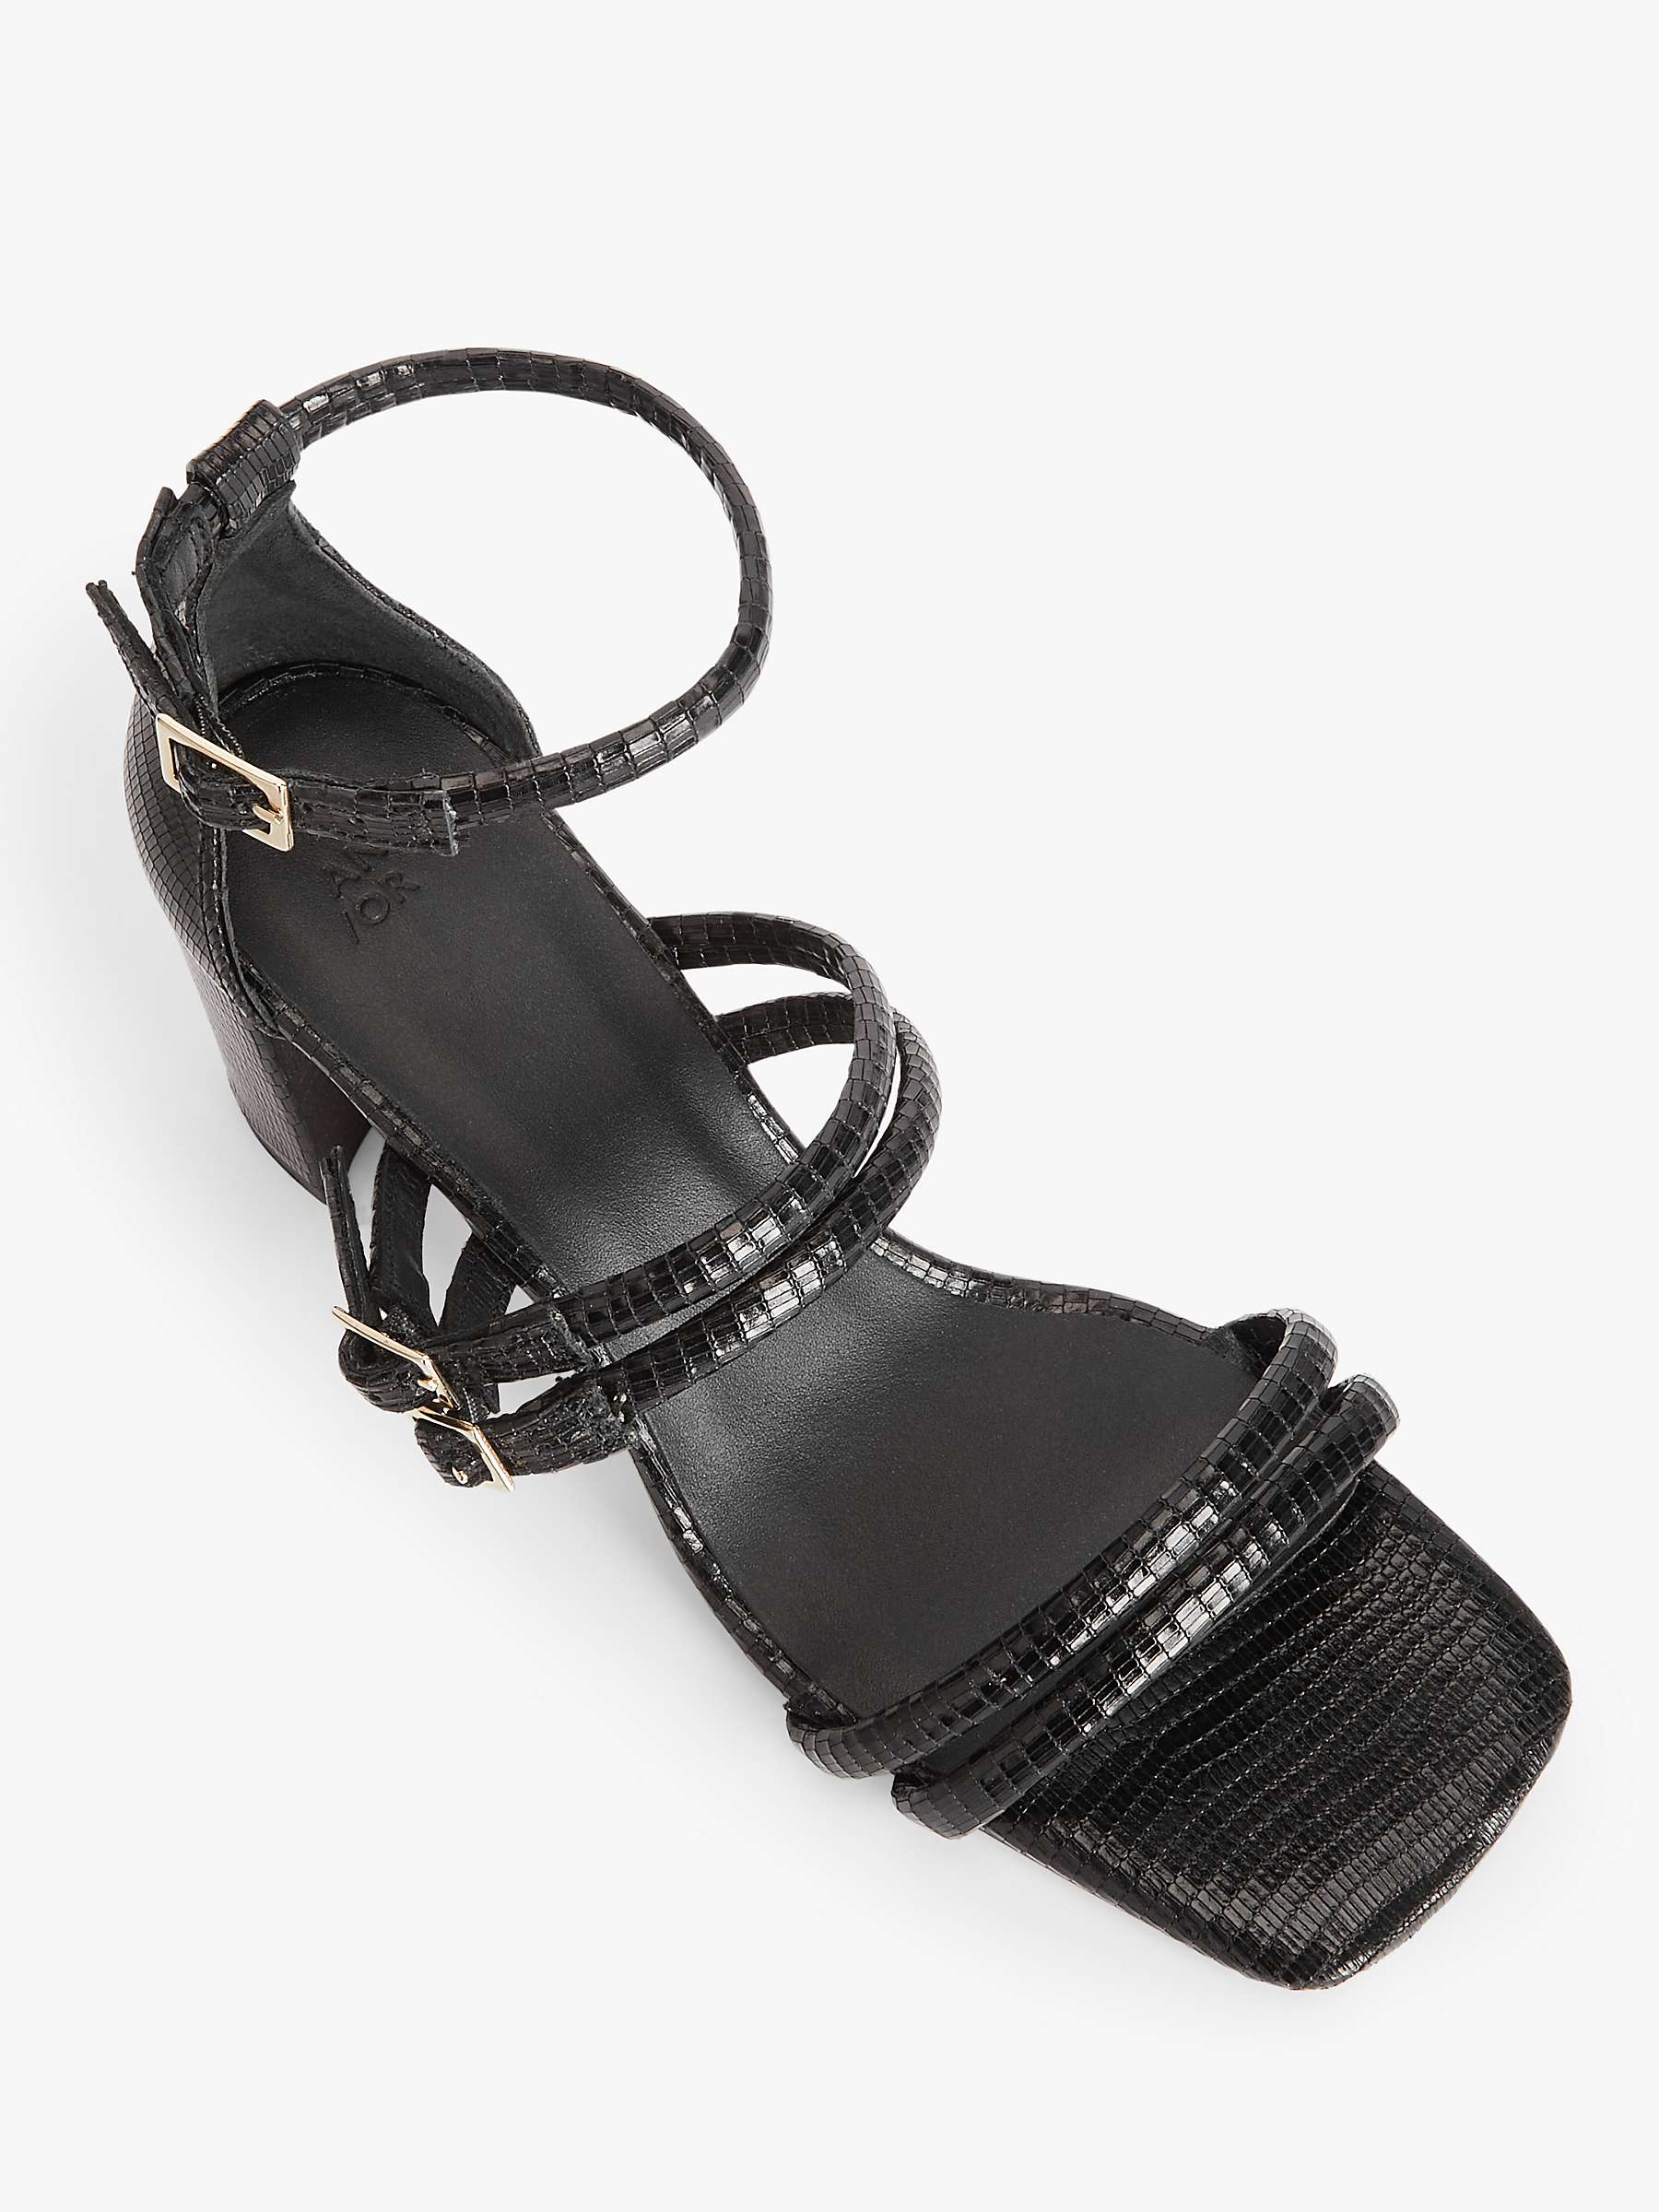 AND/OR Mystic Strappy Buckle Trim Sandals, Black at John Lewis & Partners